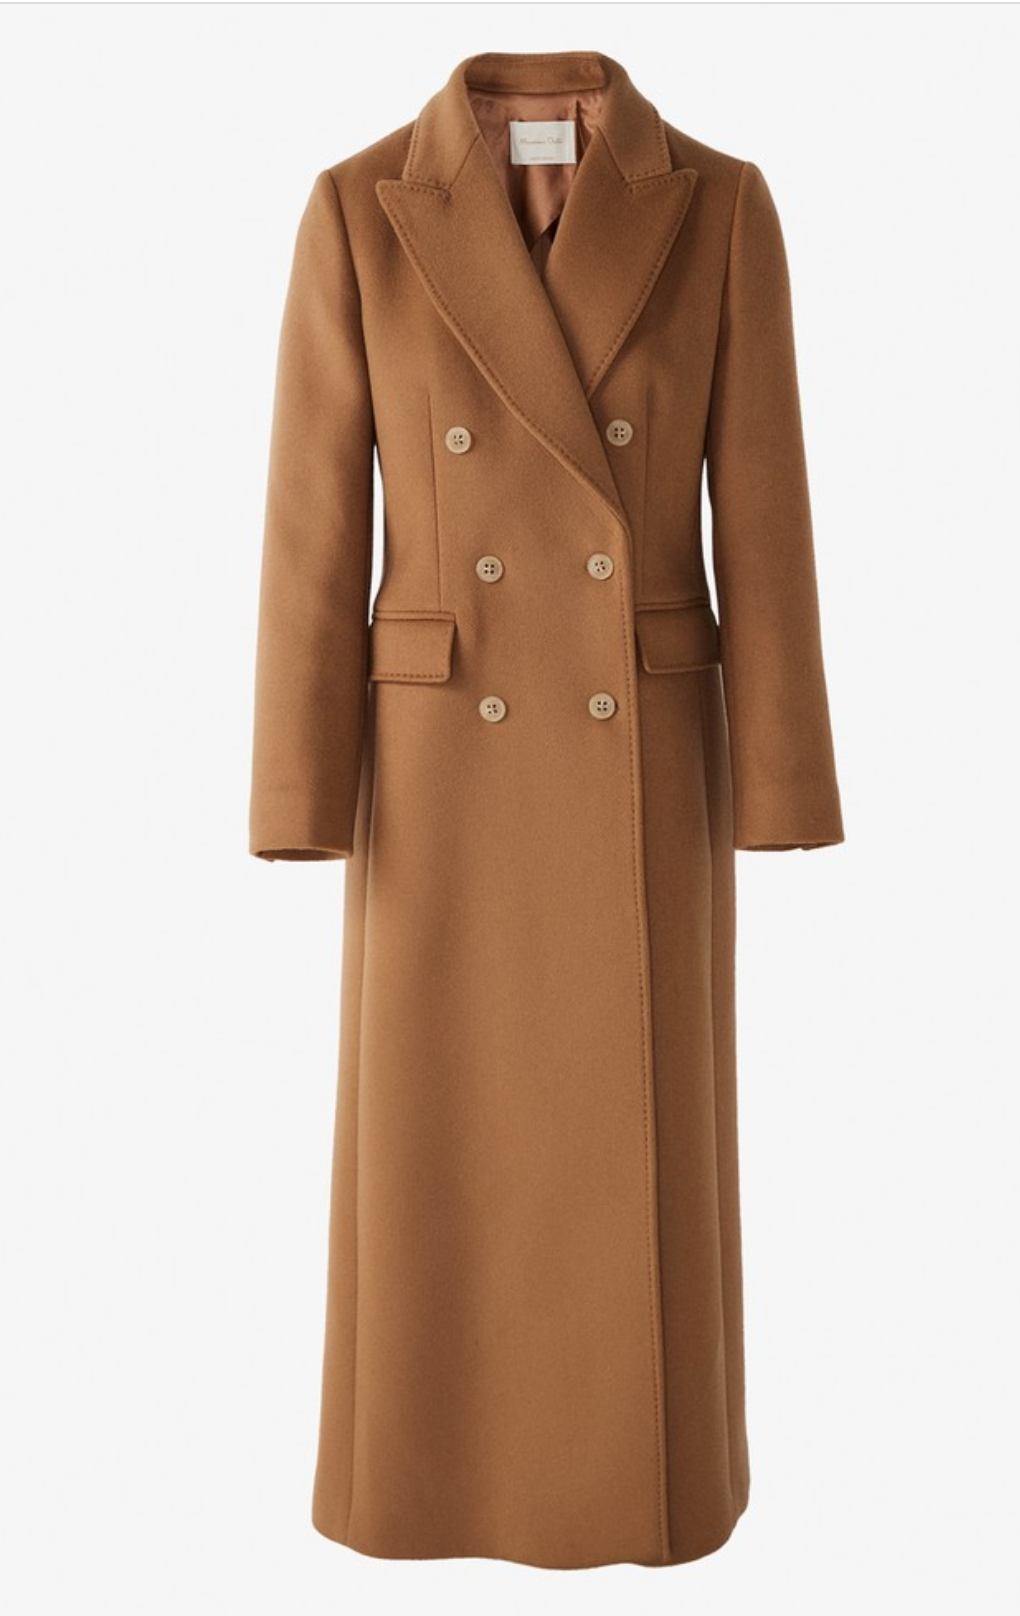 Massimo Dutti Limited Edition Buttoned Cashmere Wool Coat in Camel